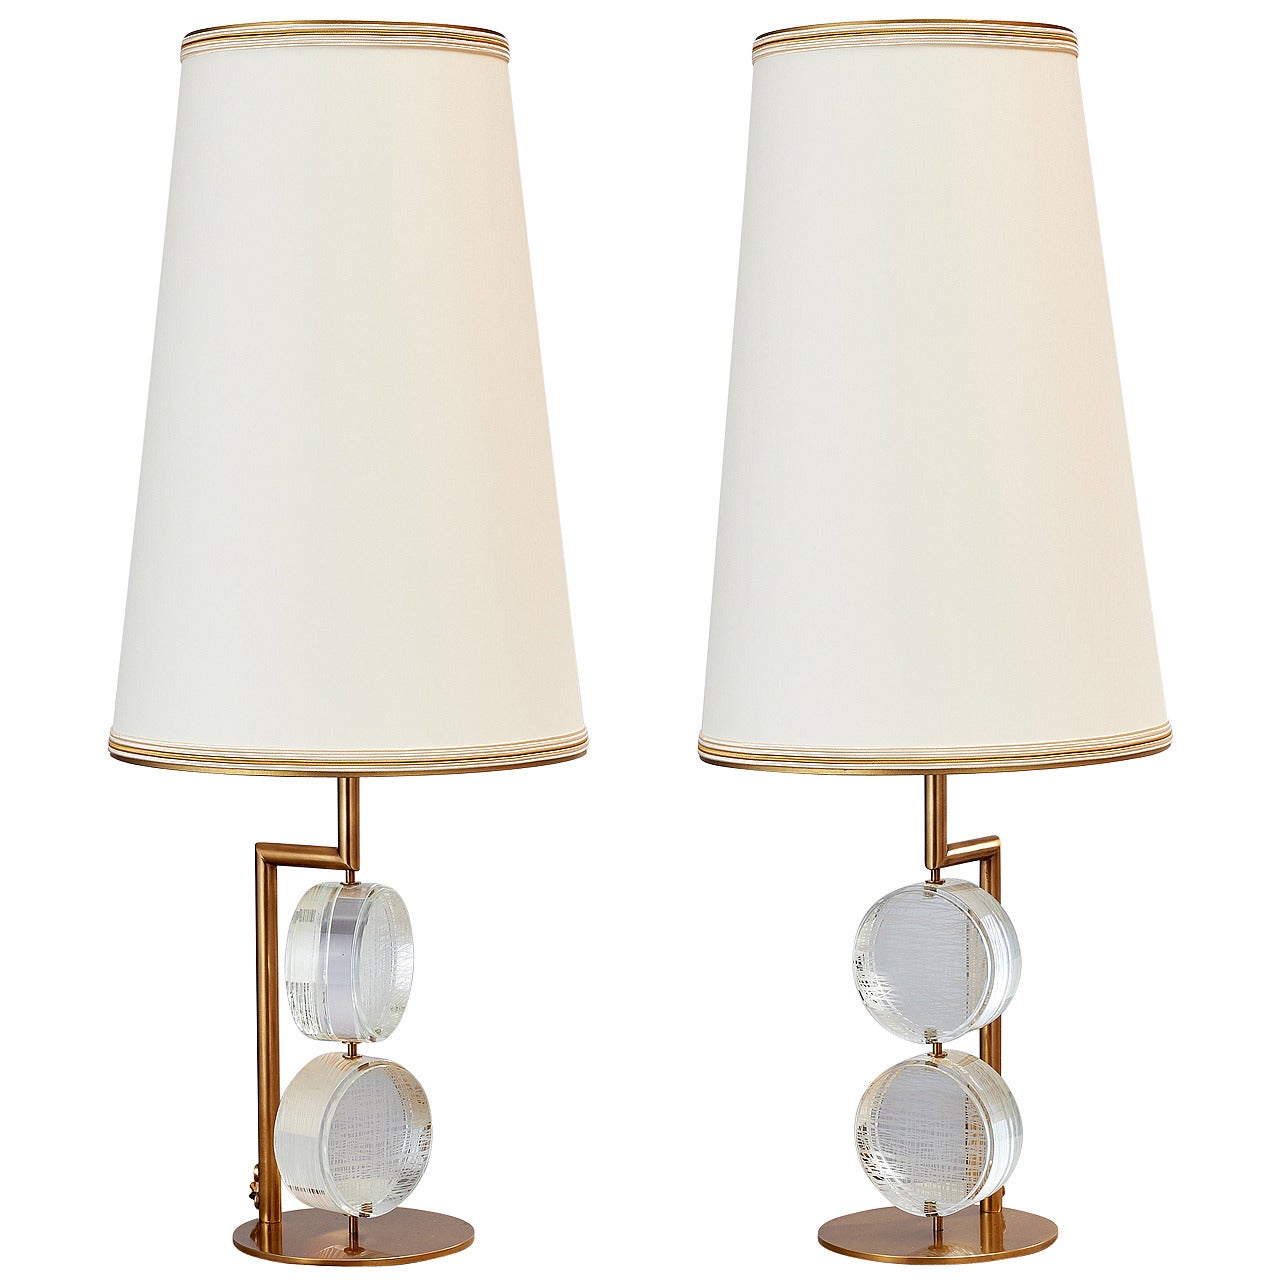 Limited Edition Pair of Etched Glass Lamps by Roberto Rida